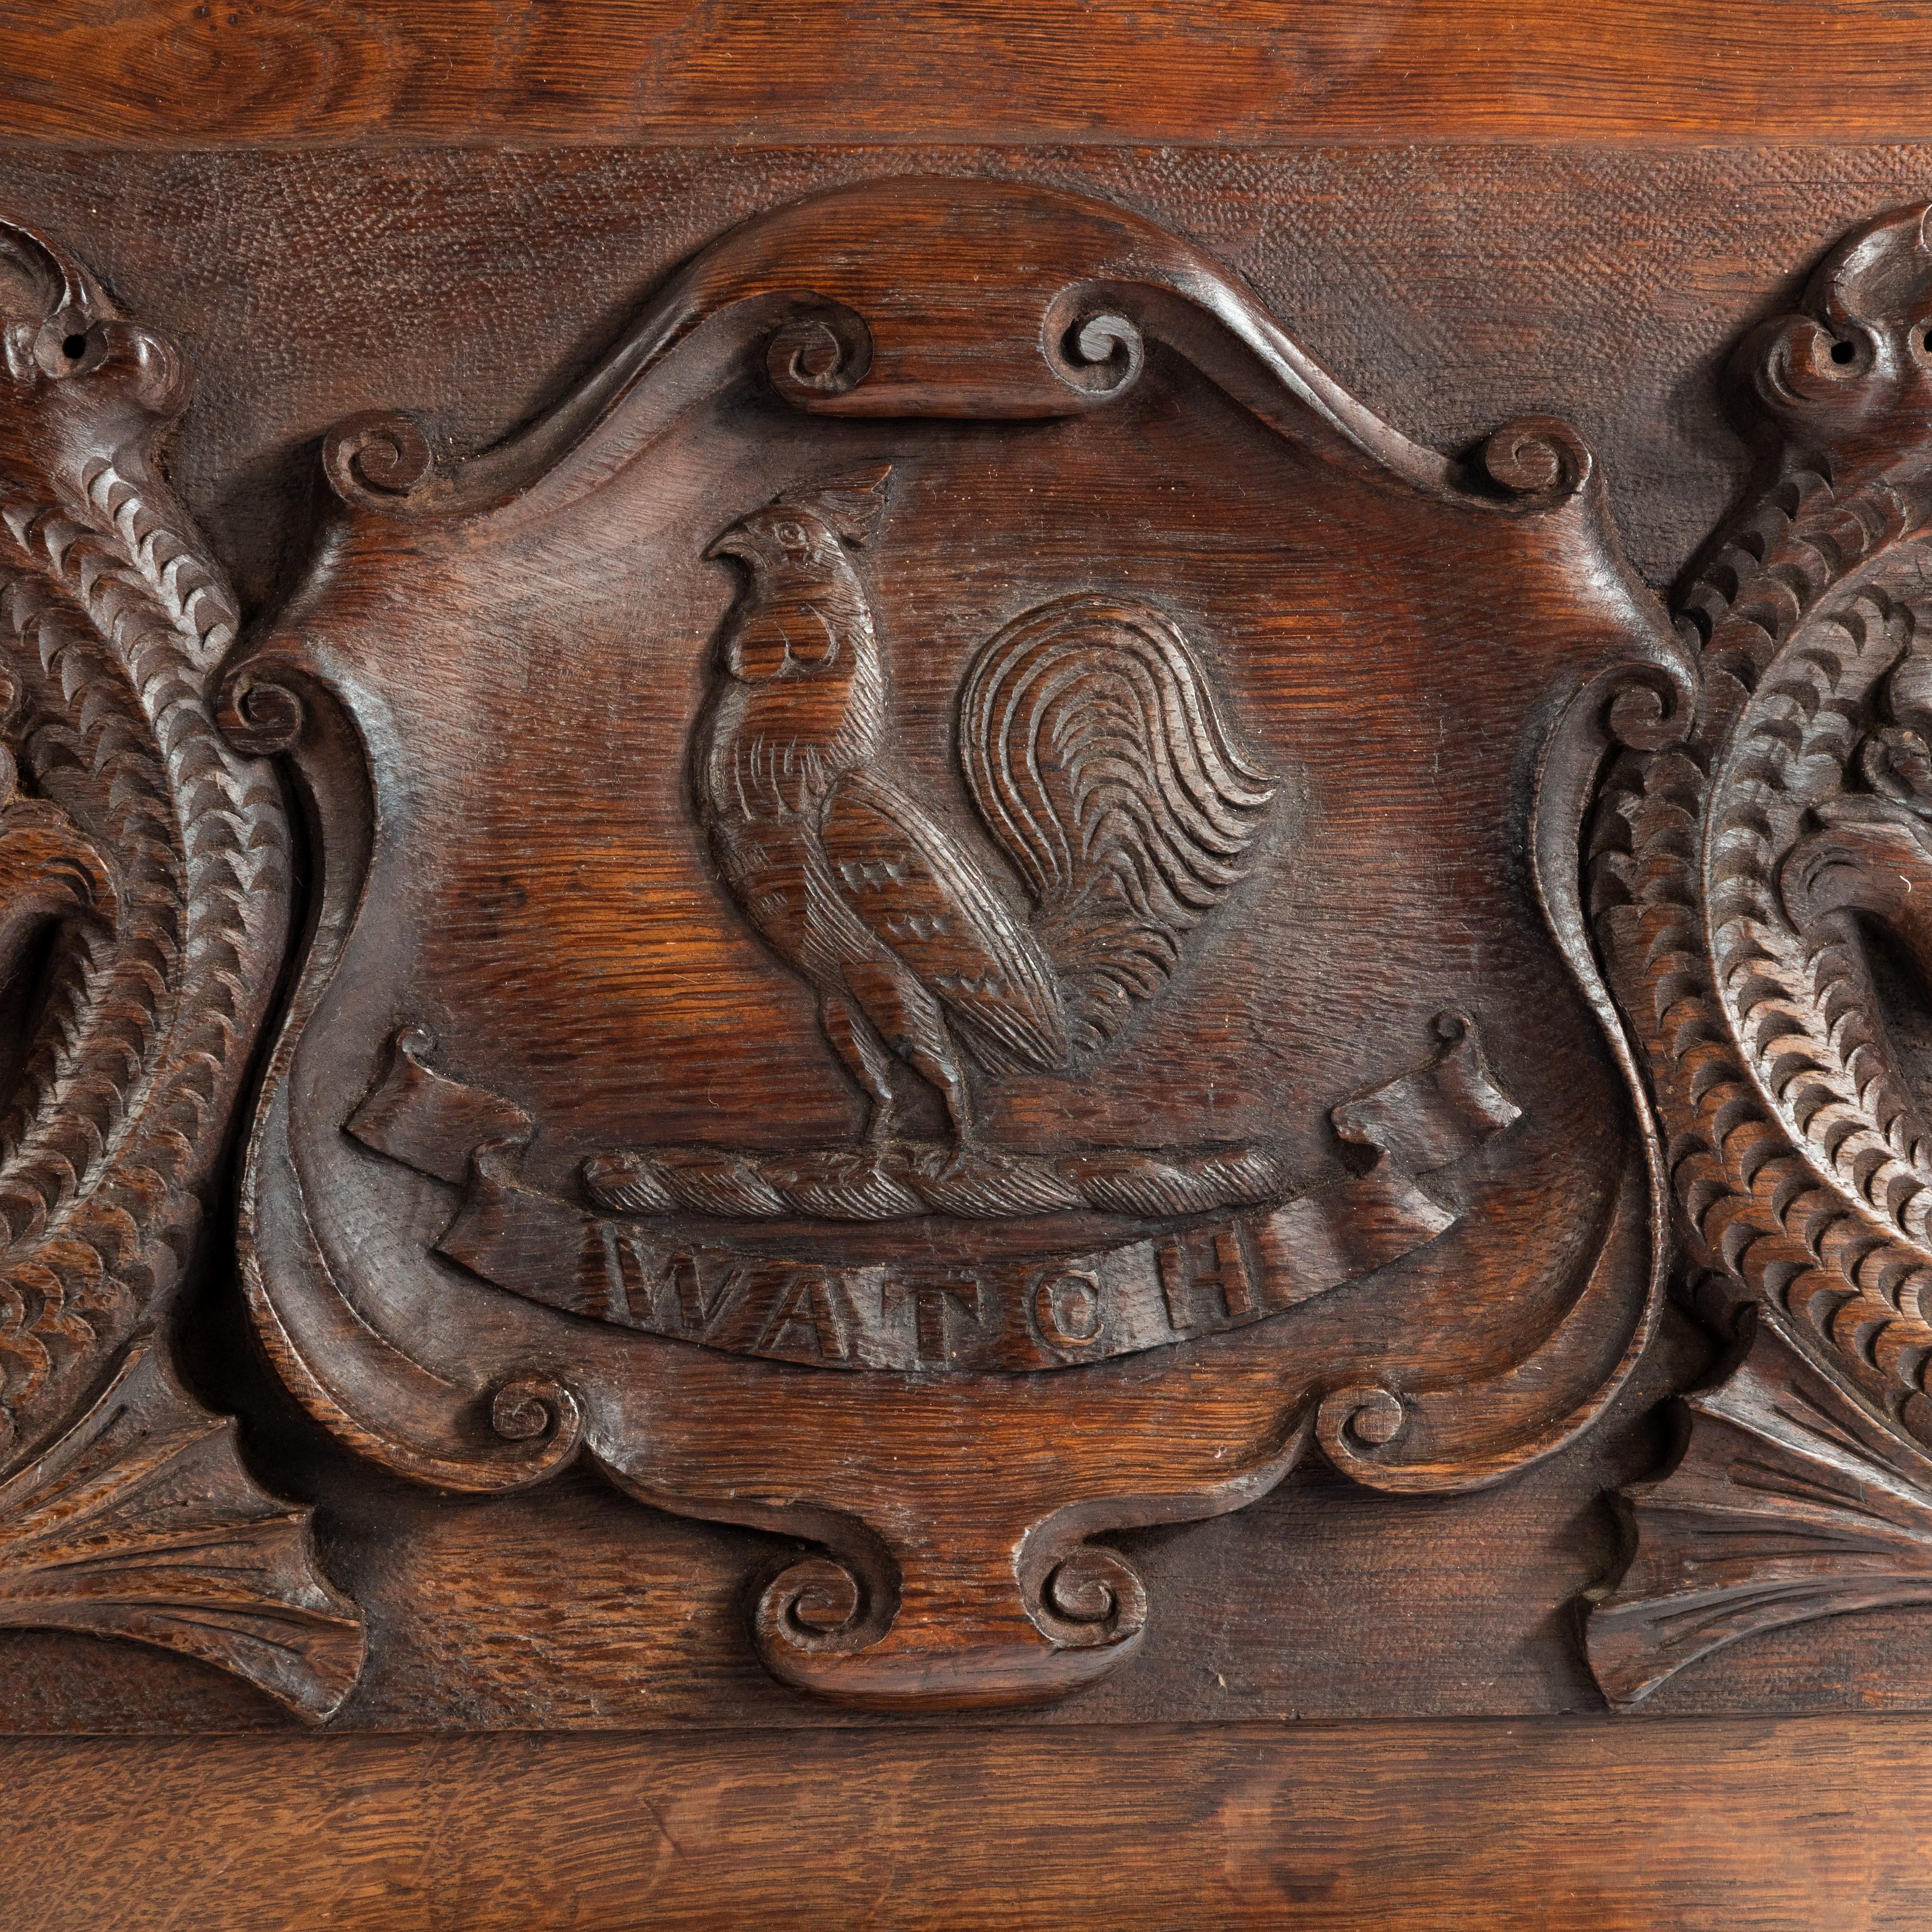 An oak barge board with the Insignia of Admiral Sir G.E. Patey, of rectangular form with a central escutcheon enclosing the arms of the Patey family; a cockerel and a ribbon bearing the word WATCH, flanked by dolphins with scrolling tails. This